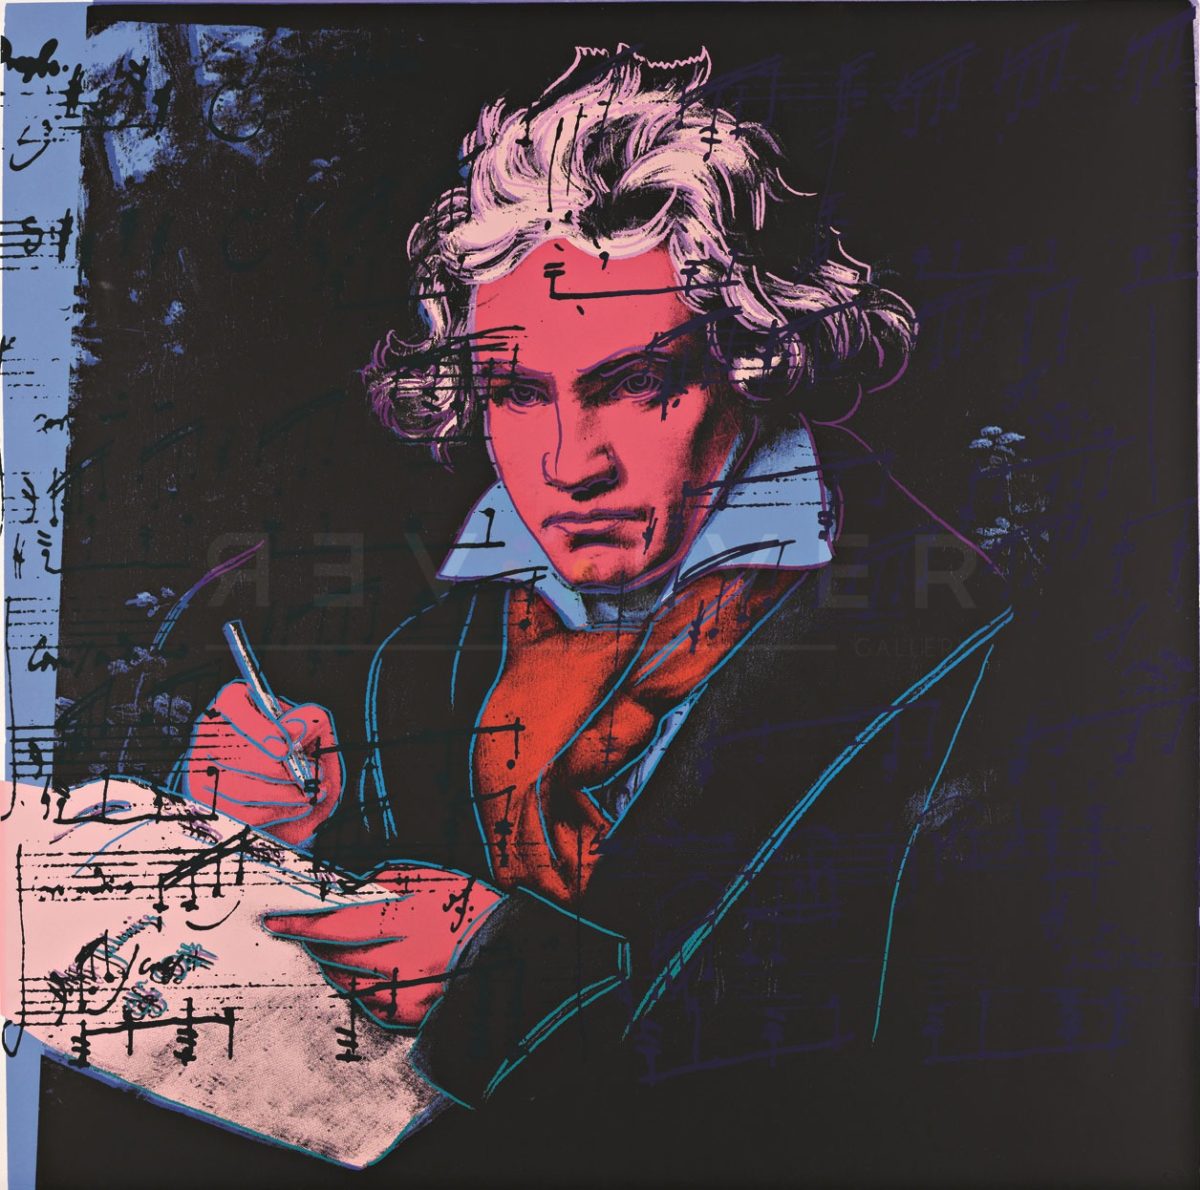 Shows the third piece of this series (Beethoven 392 by Andy Warhol).